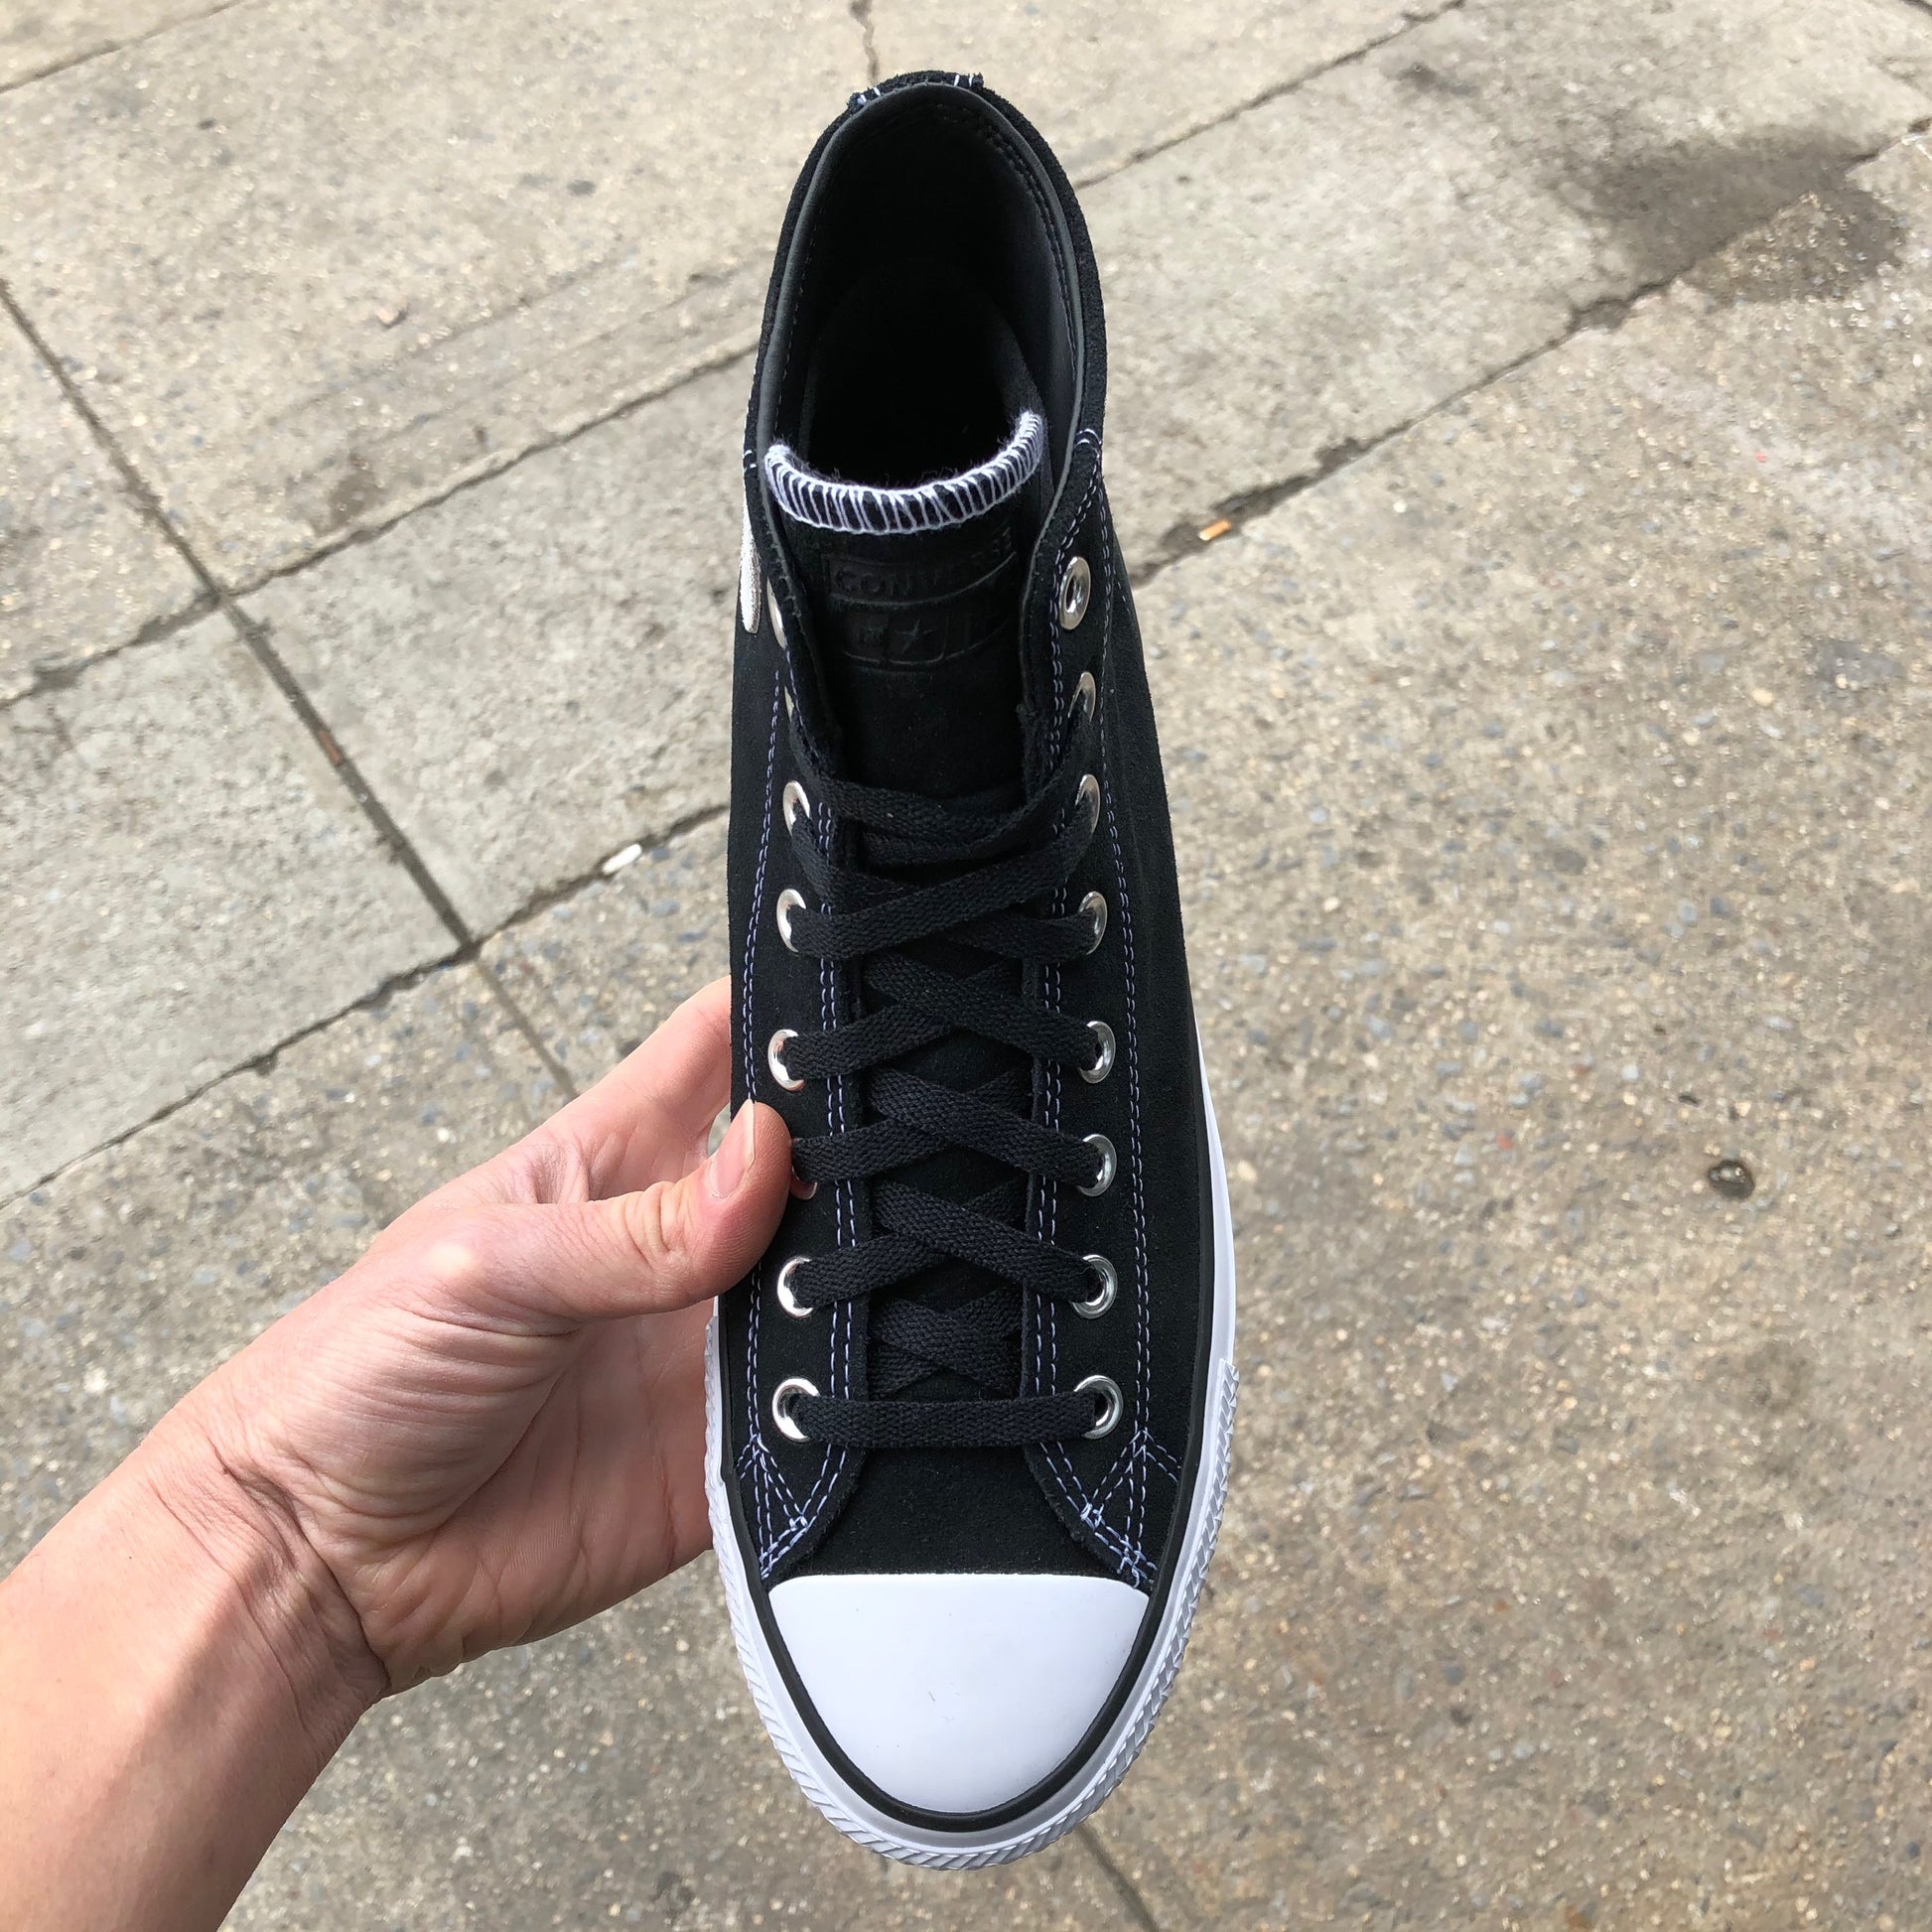 black hi top sneaker with white sole and toe, top view